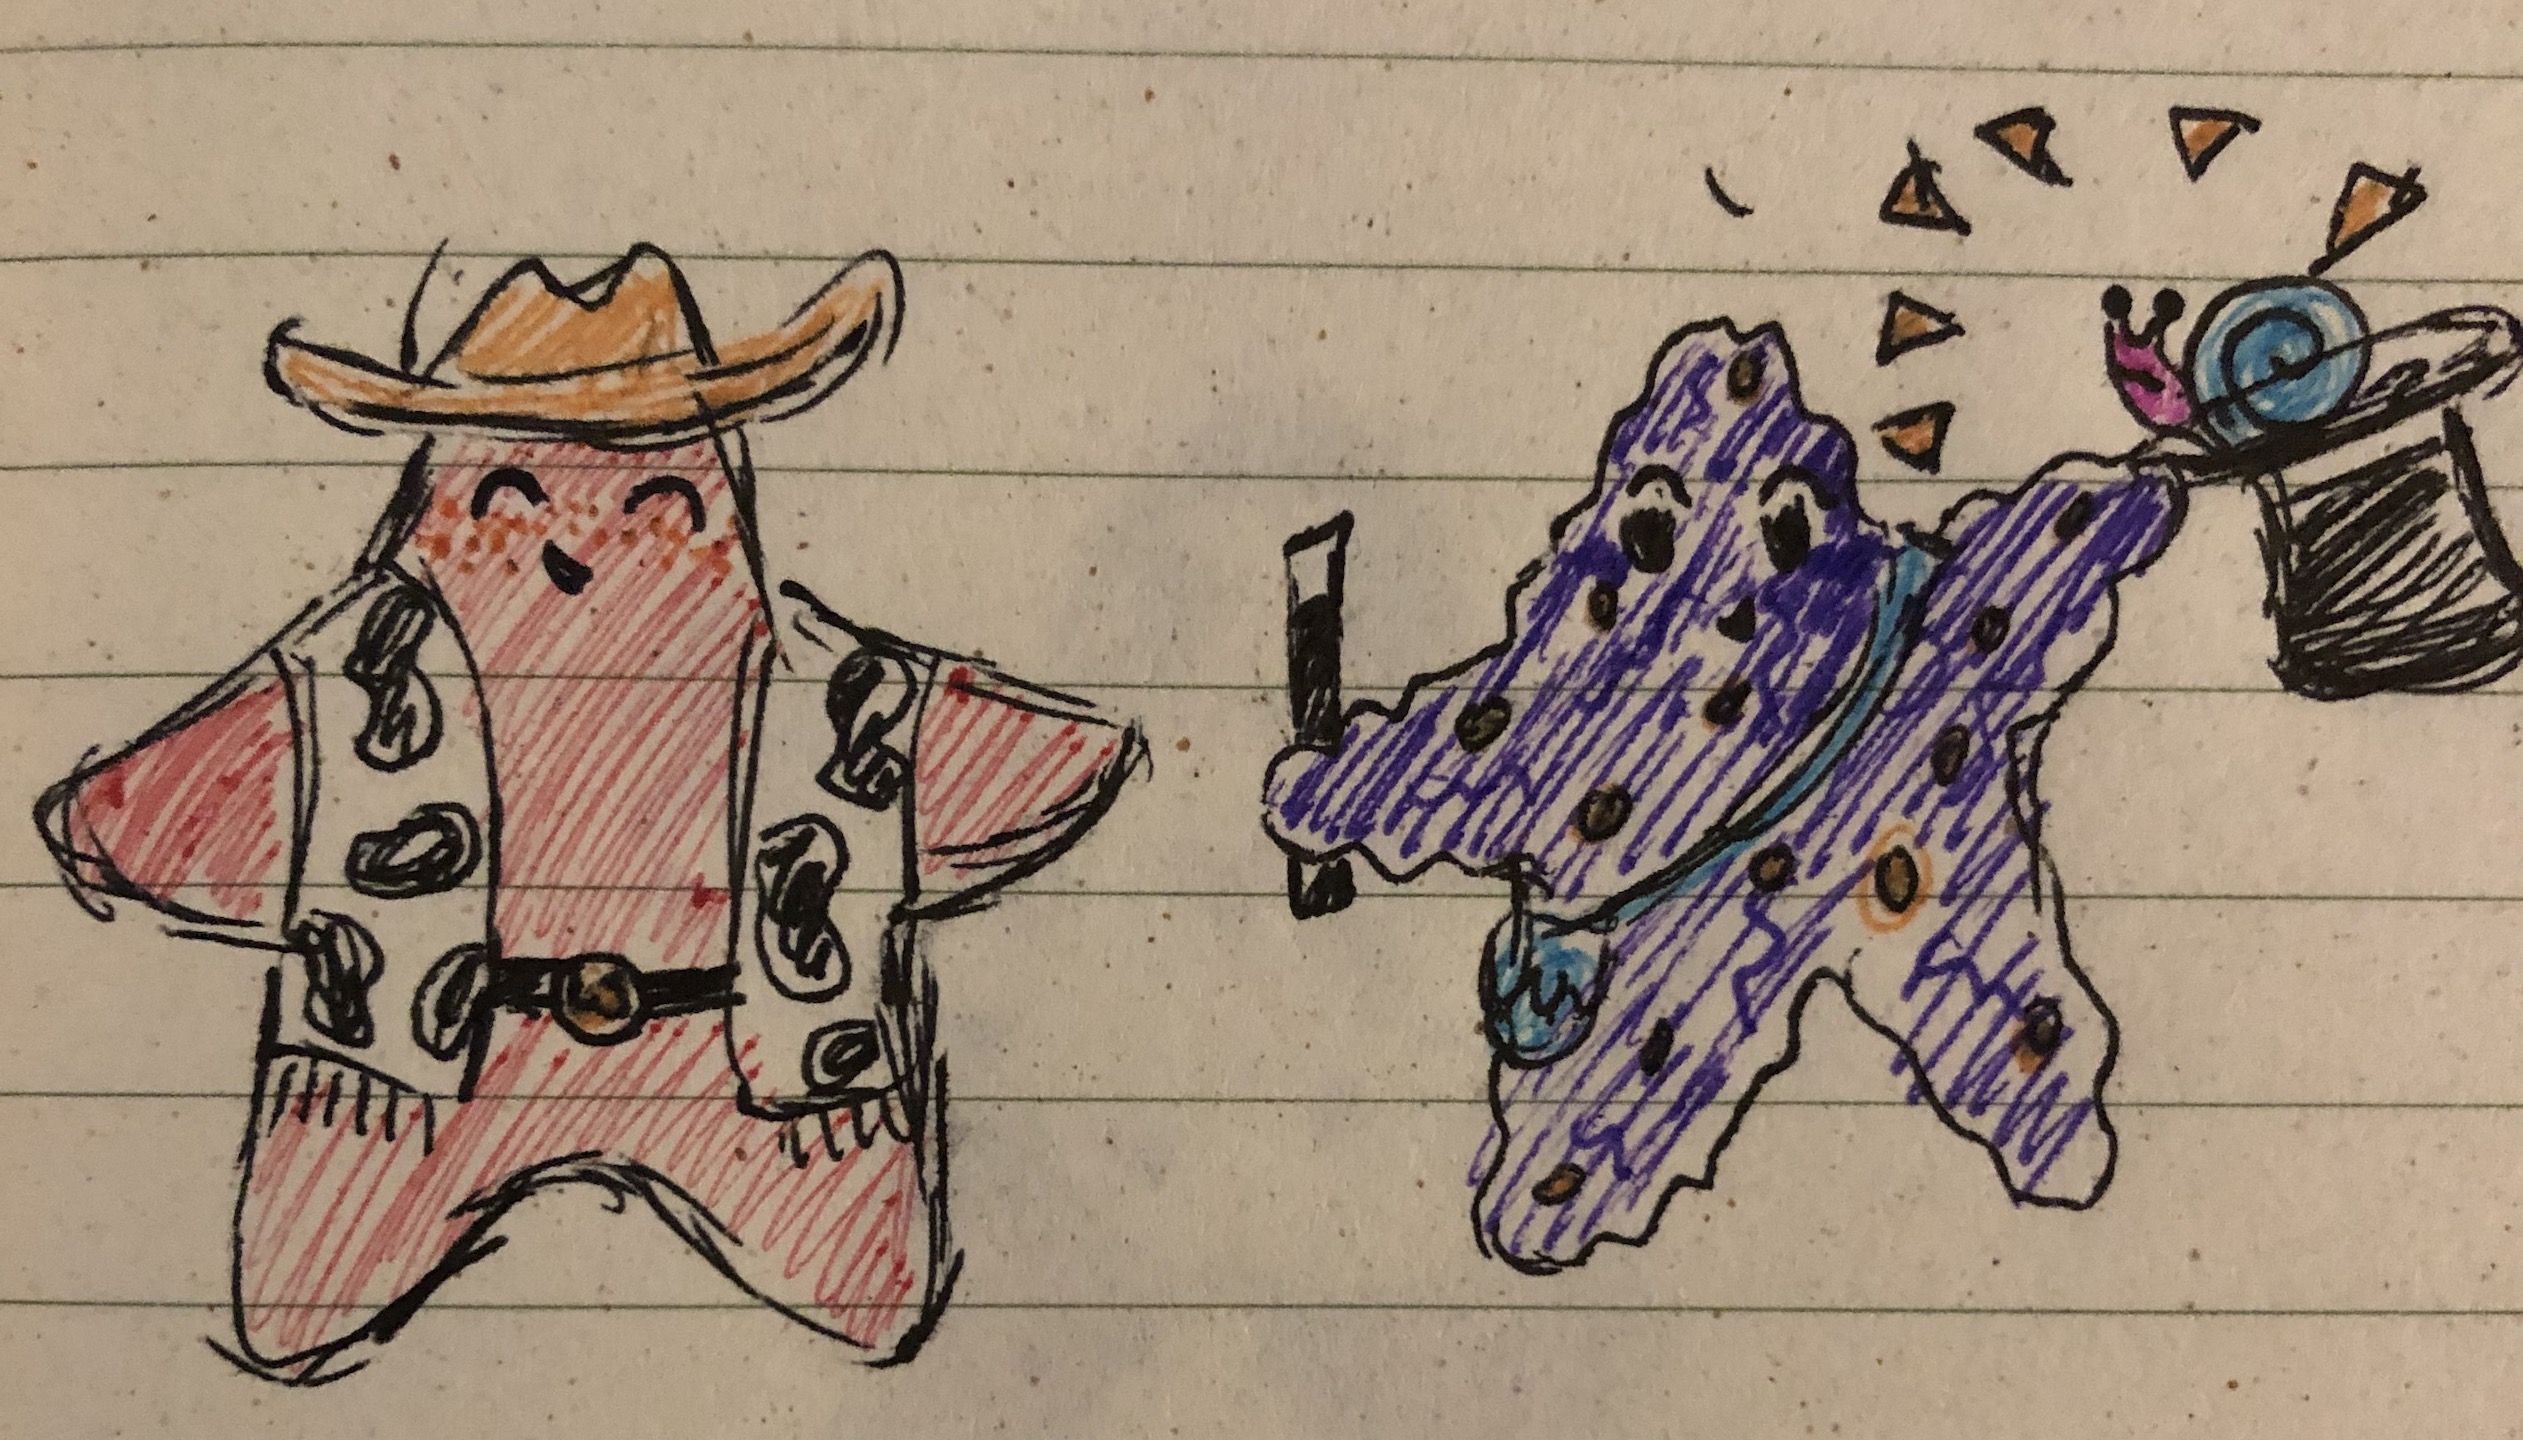 Crooked star is holding a magician wand and a top hat with a snail emerging from it. Lone star looks delighted at the trick